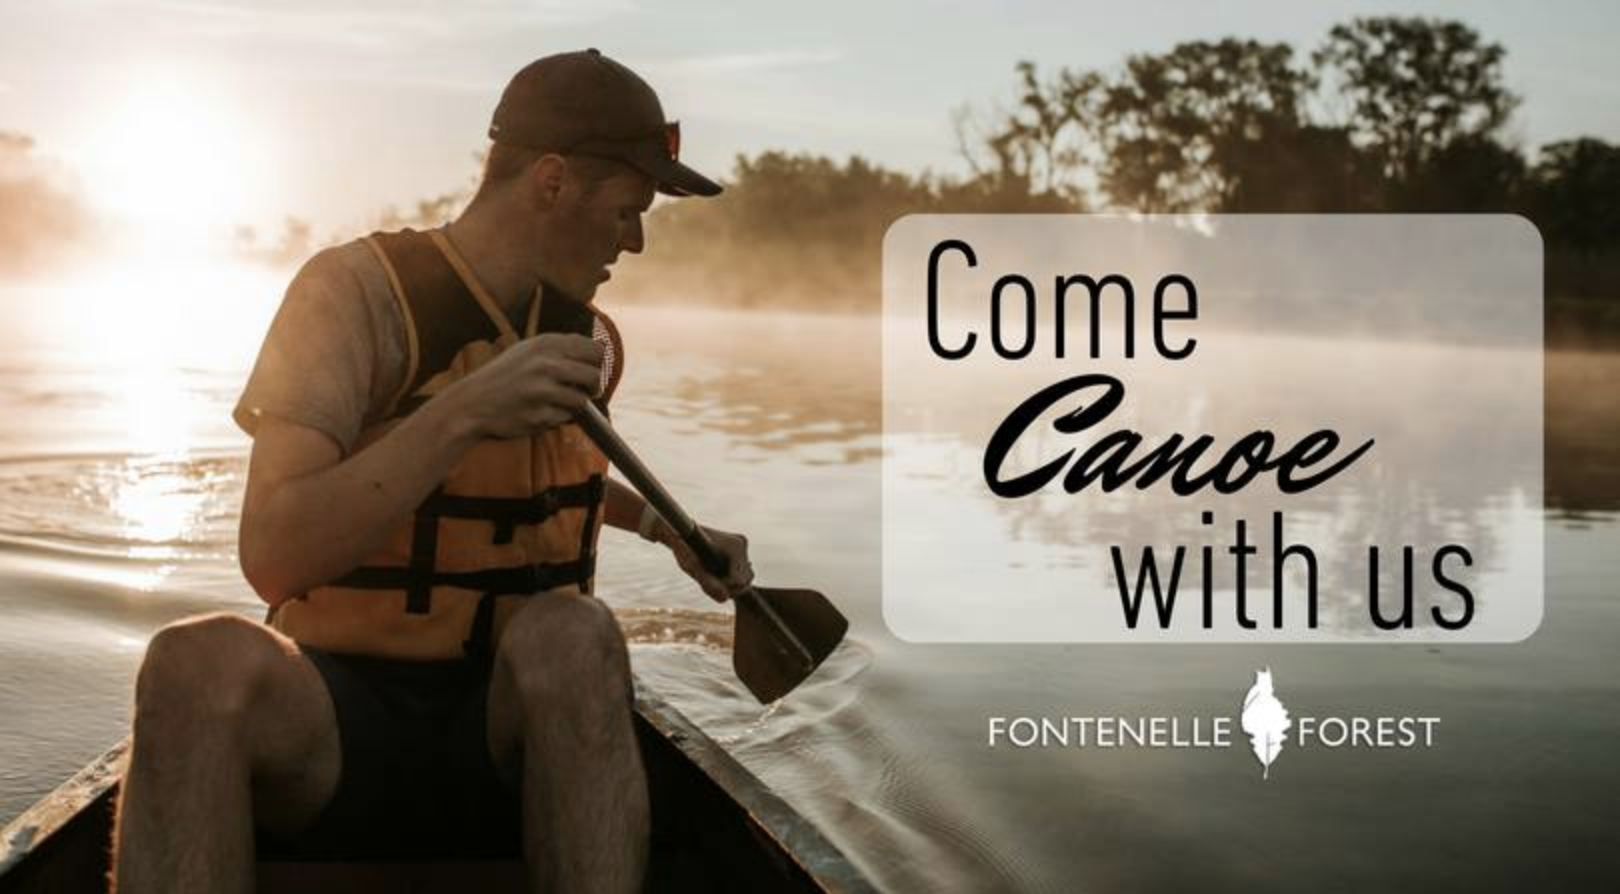 Picture of a man conoeing on a lake with the text overlay " Come canoe with us"